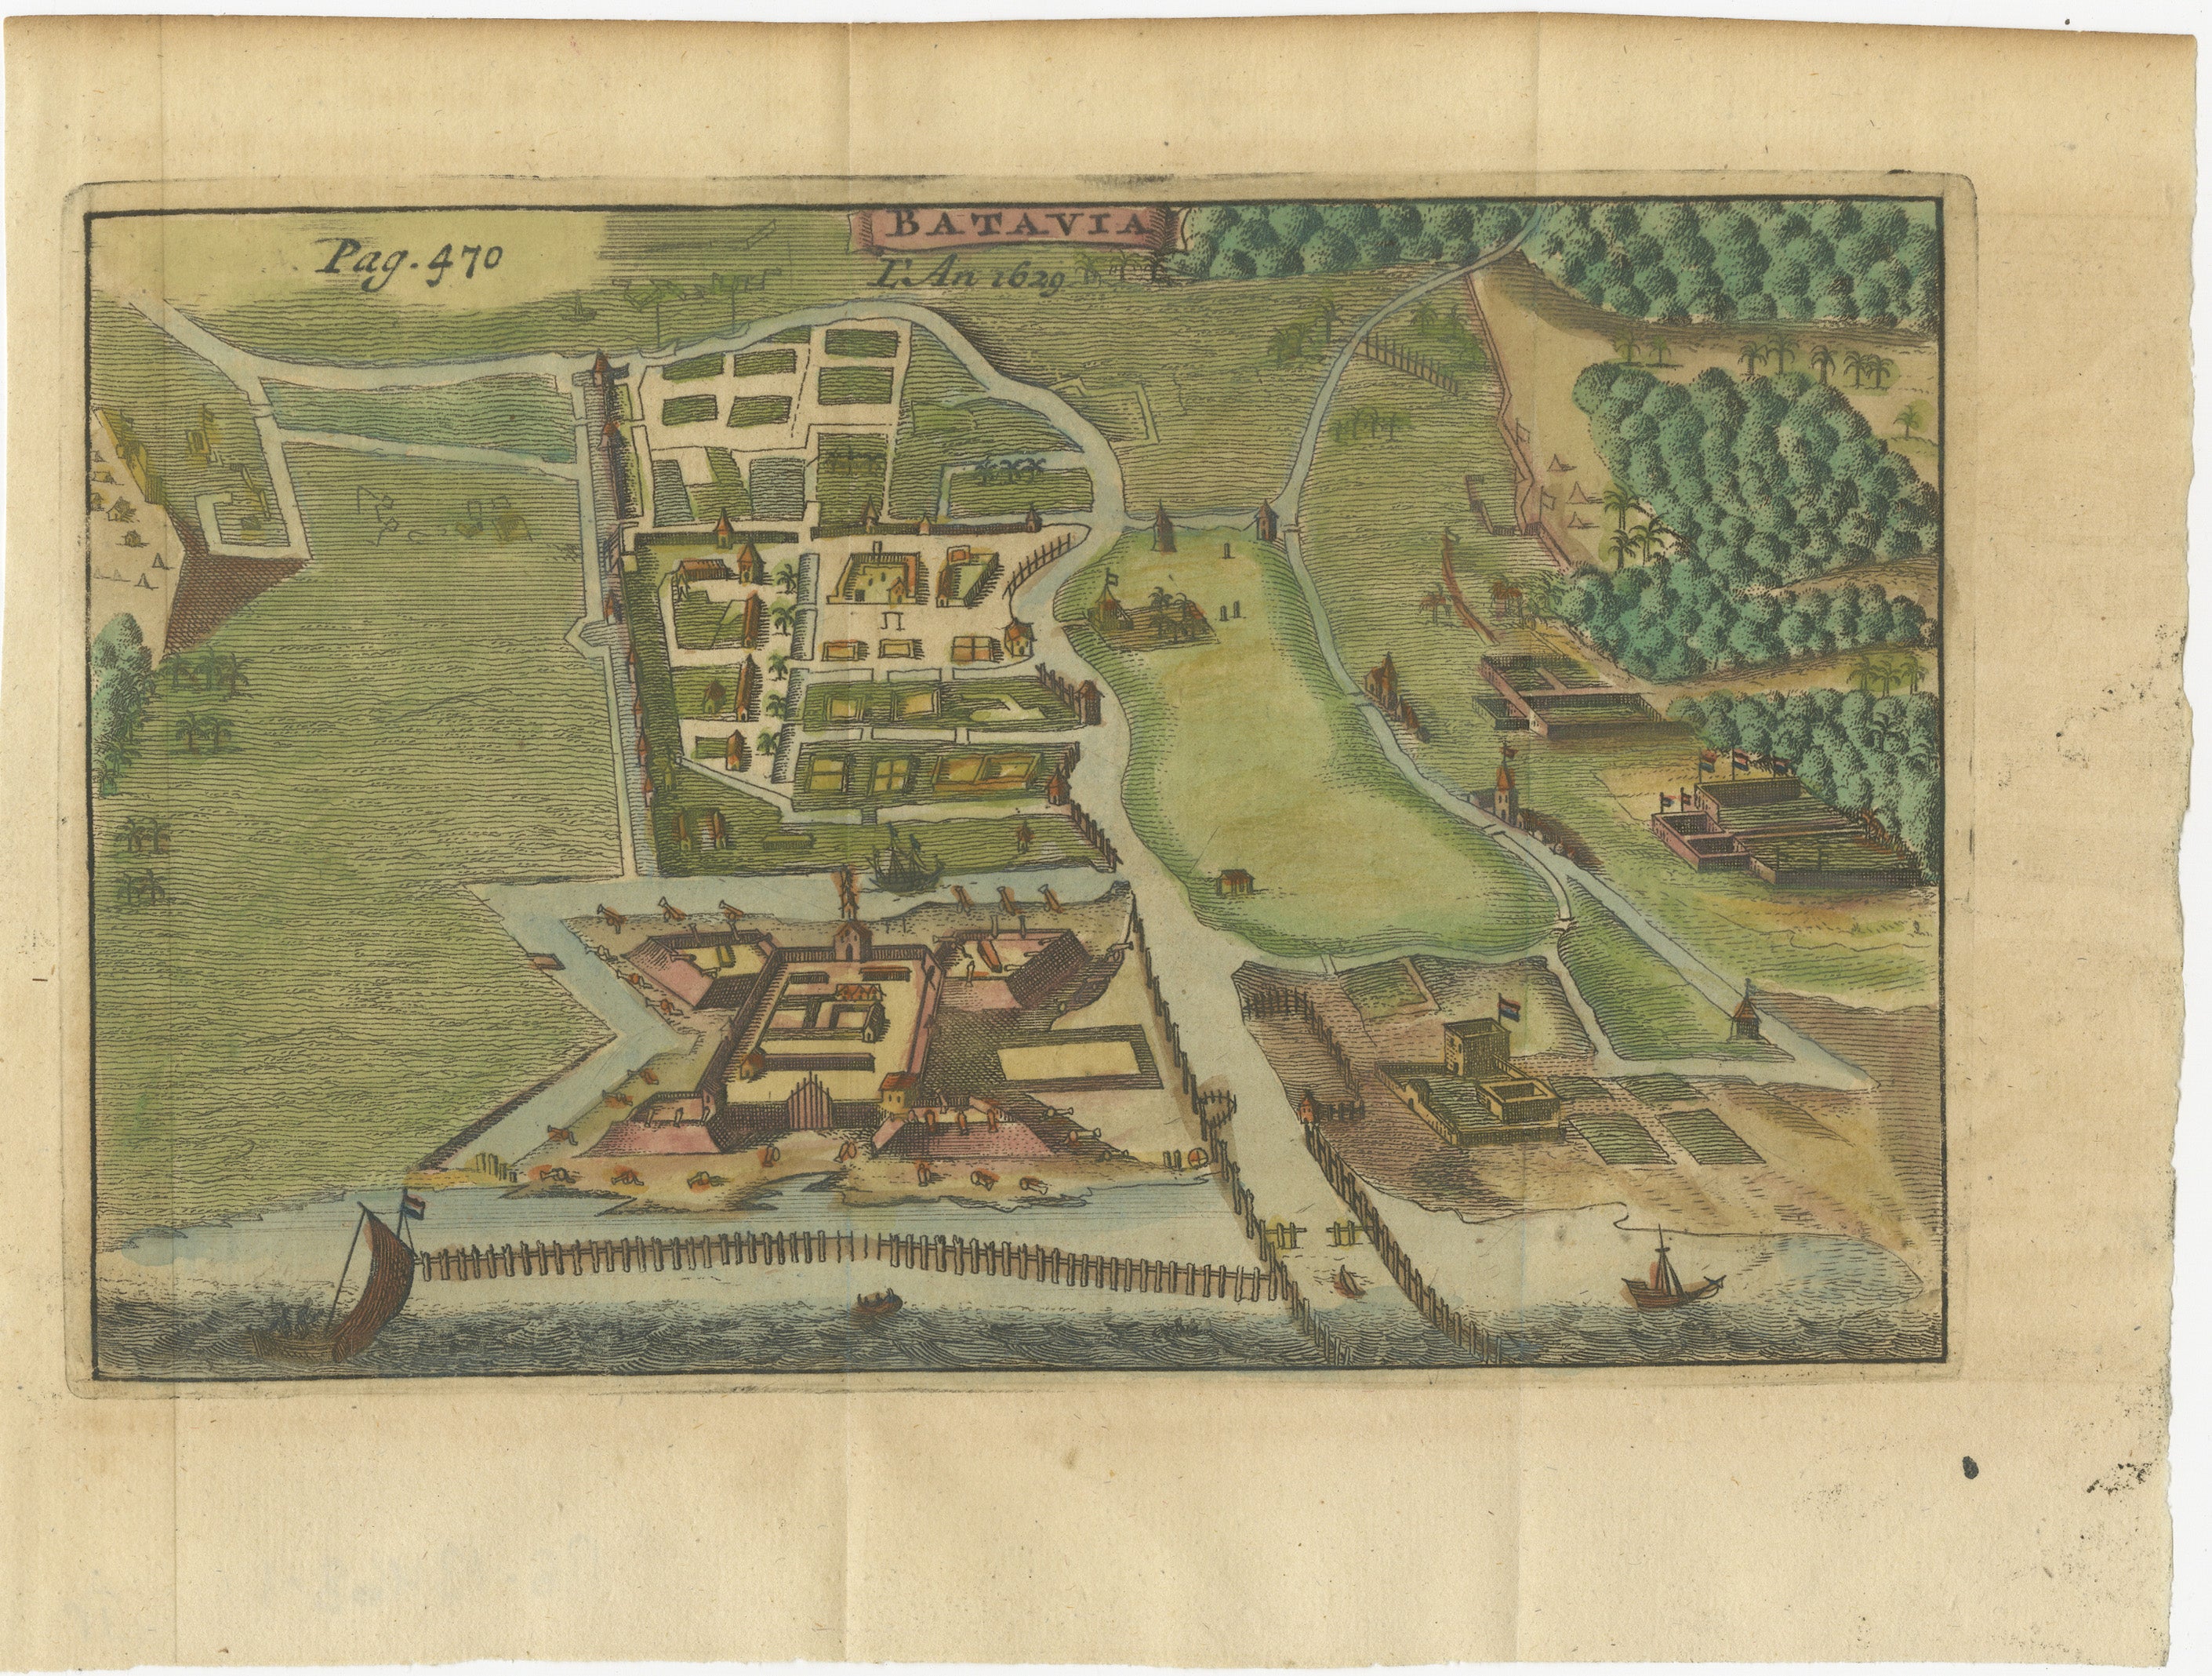 An original490 historic map or bird's-eye view of Batavia (now Jakarta) as it was in the year 1629. Batavia was the name given to the city by the Dutch during their colonization of what is now Indonesia. 

The map is detailed and colored, showing